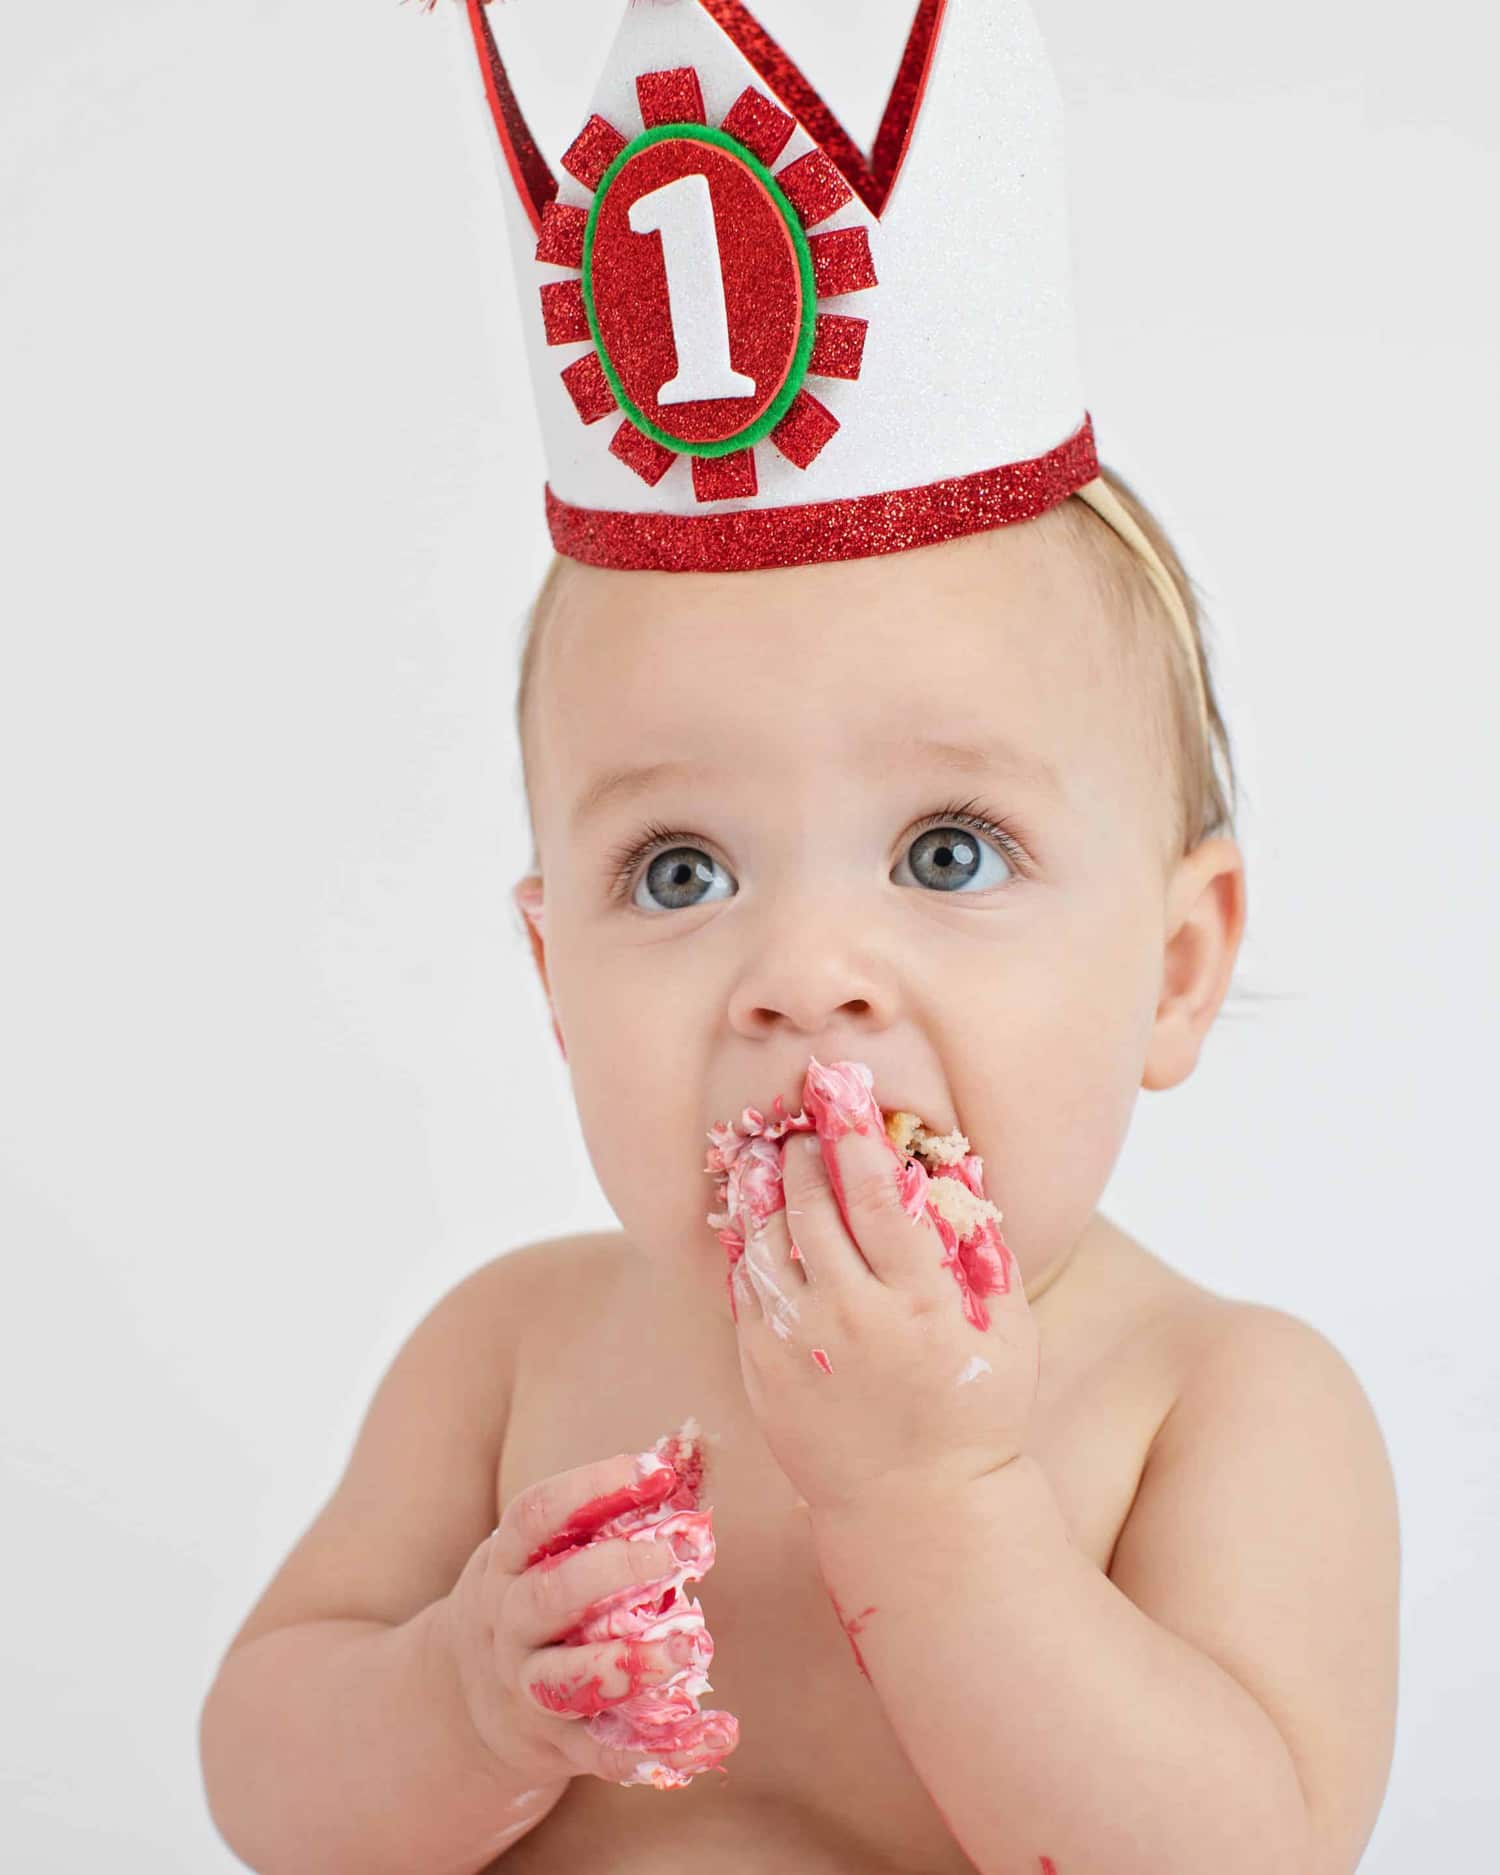 A baby in a birthday hat.